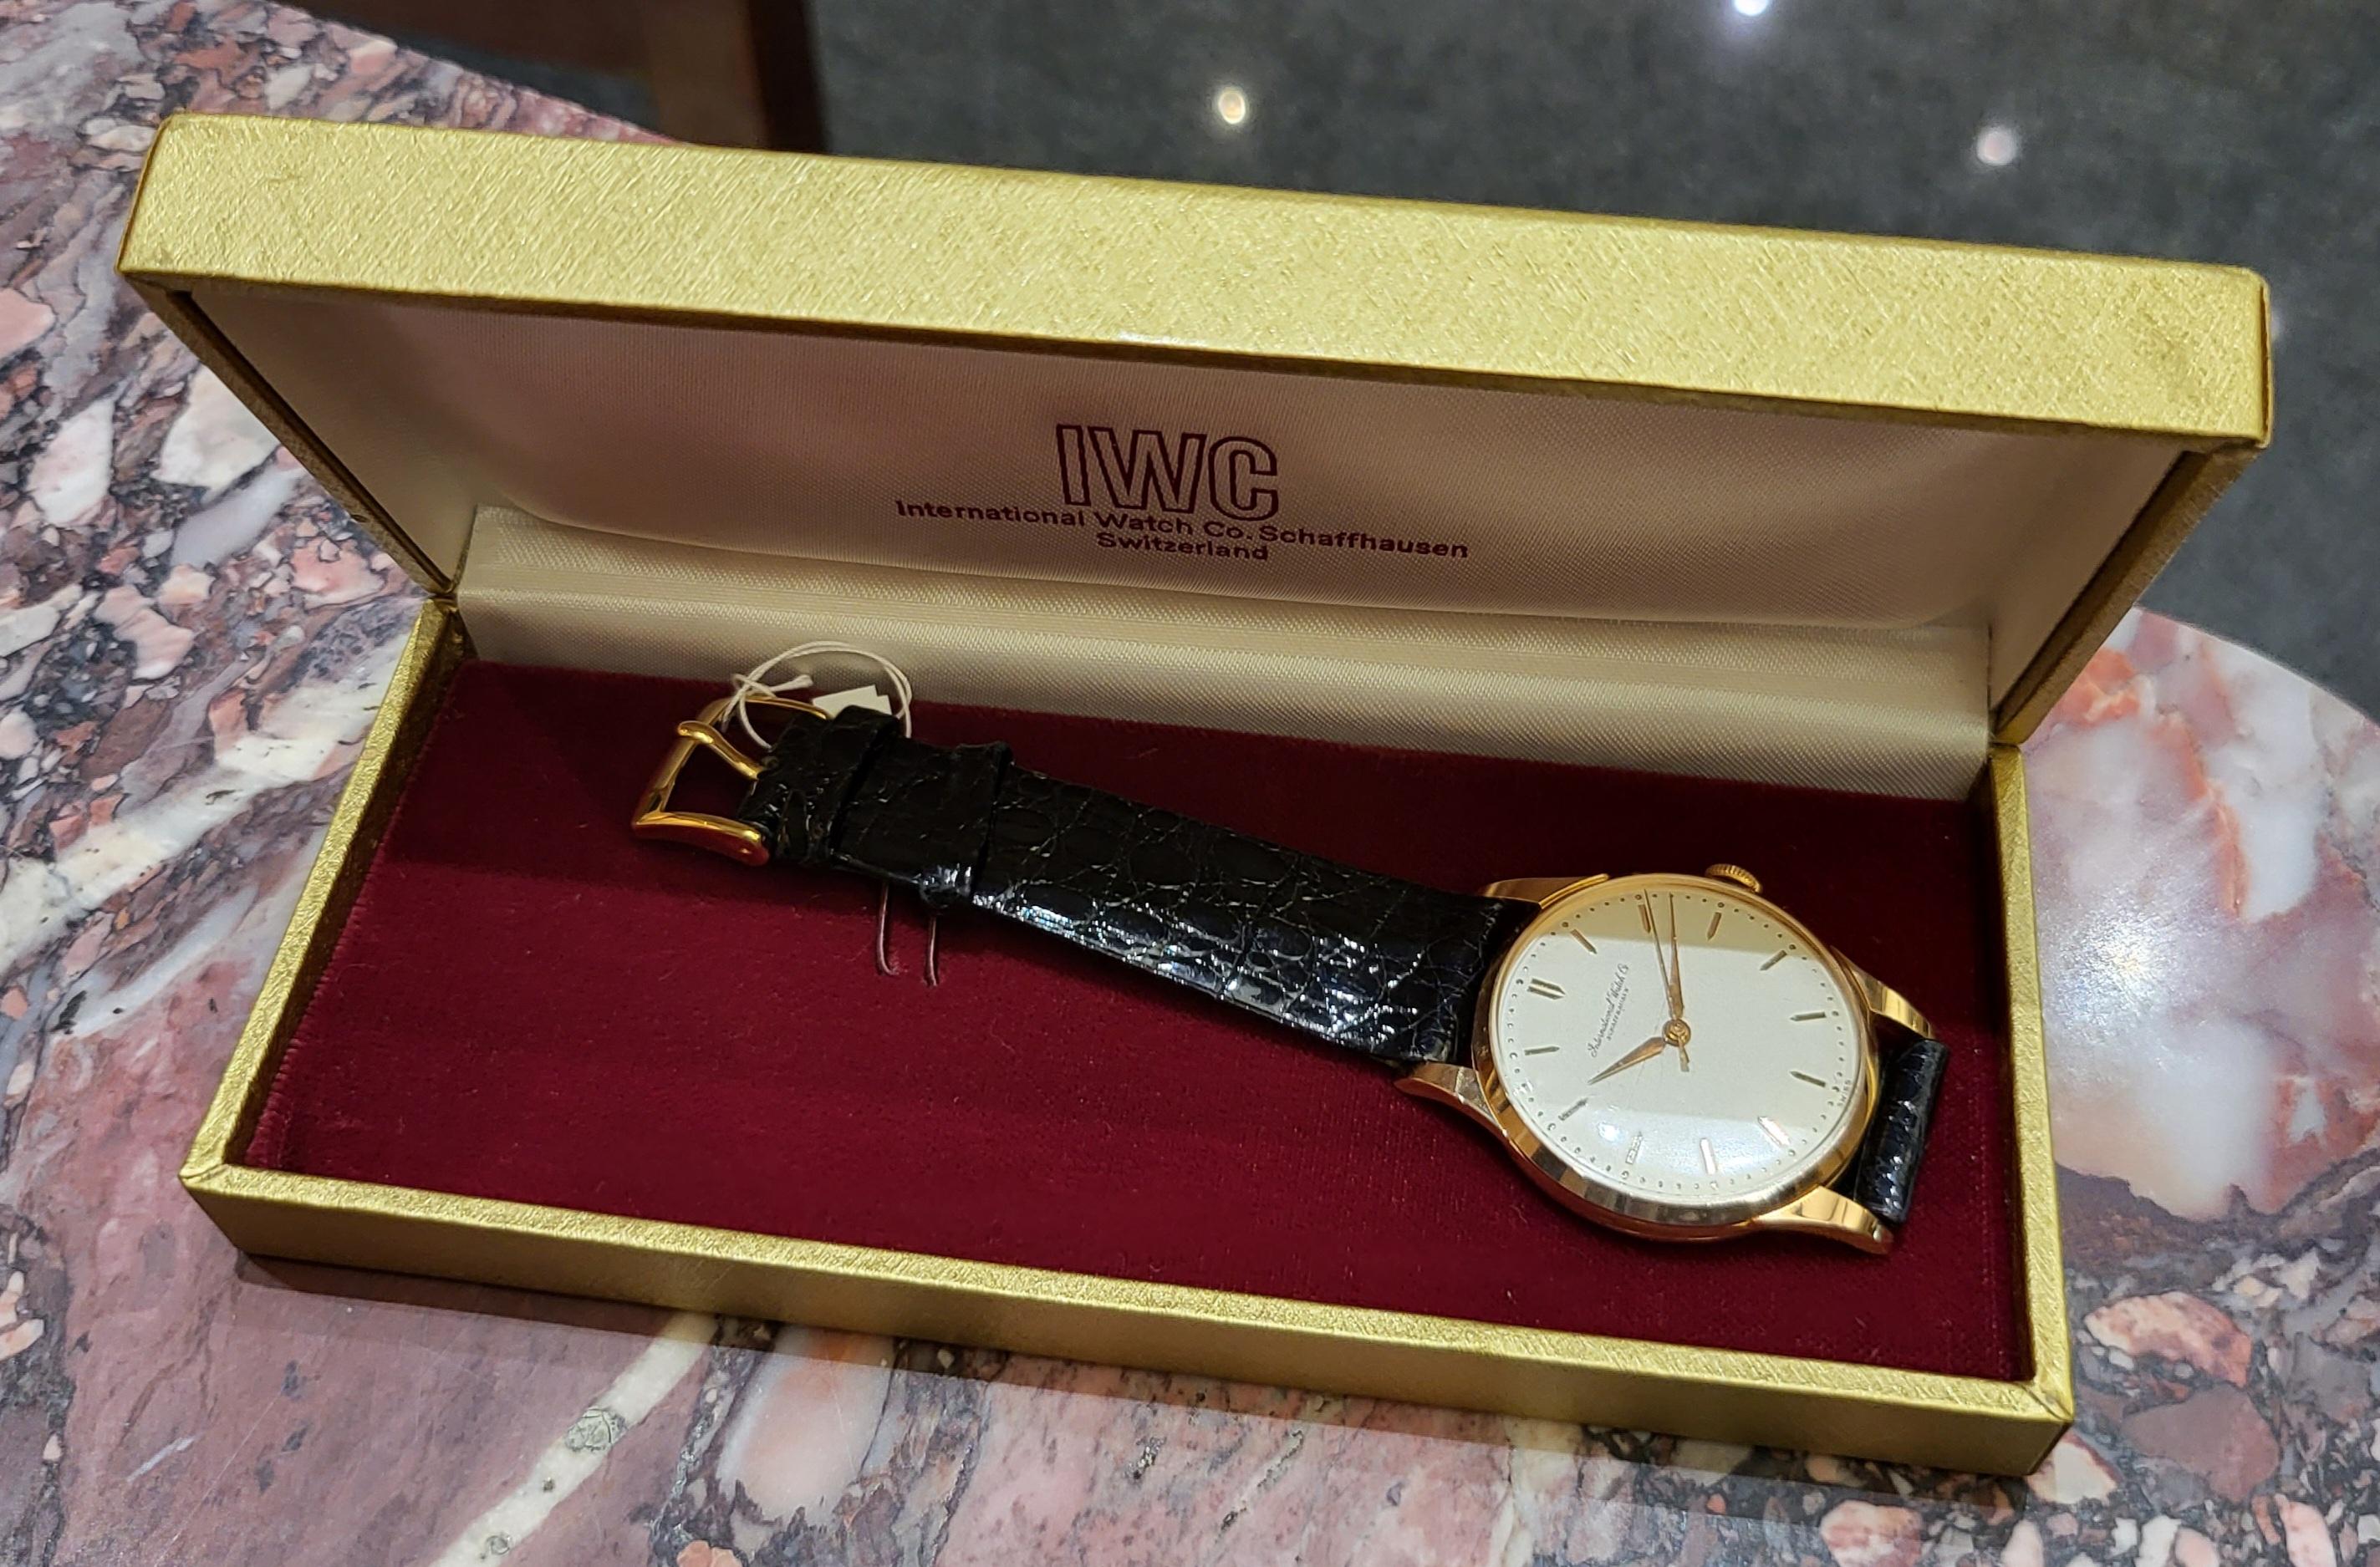 18kt Pink Gold IWC Wrist Watch Caliber 89, Calatrava

Beautiful collectors watch in mint condition

Movement : Mechanical Manual Winding Caliber 89

Case : Solid 18kt pink gold, Diameter 33mm, thickness 8.9mm

Strap : Croc, will max fit a 19cm wrist